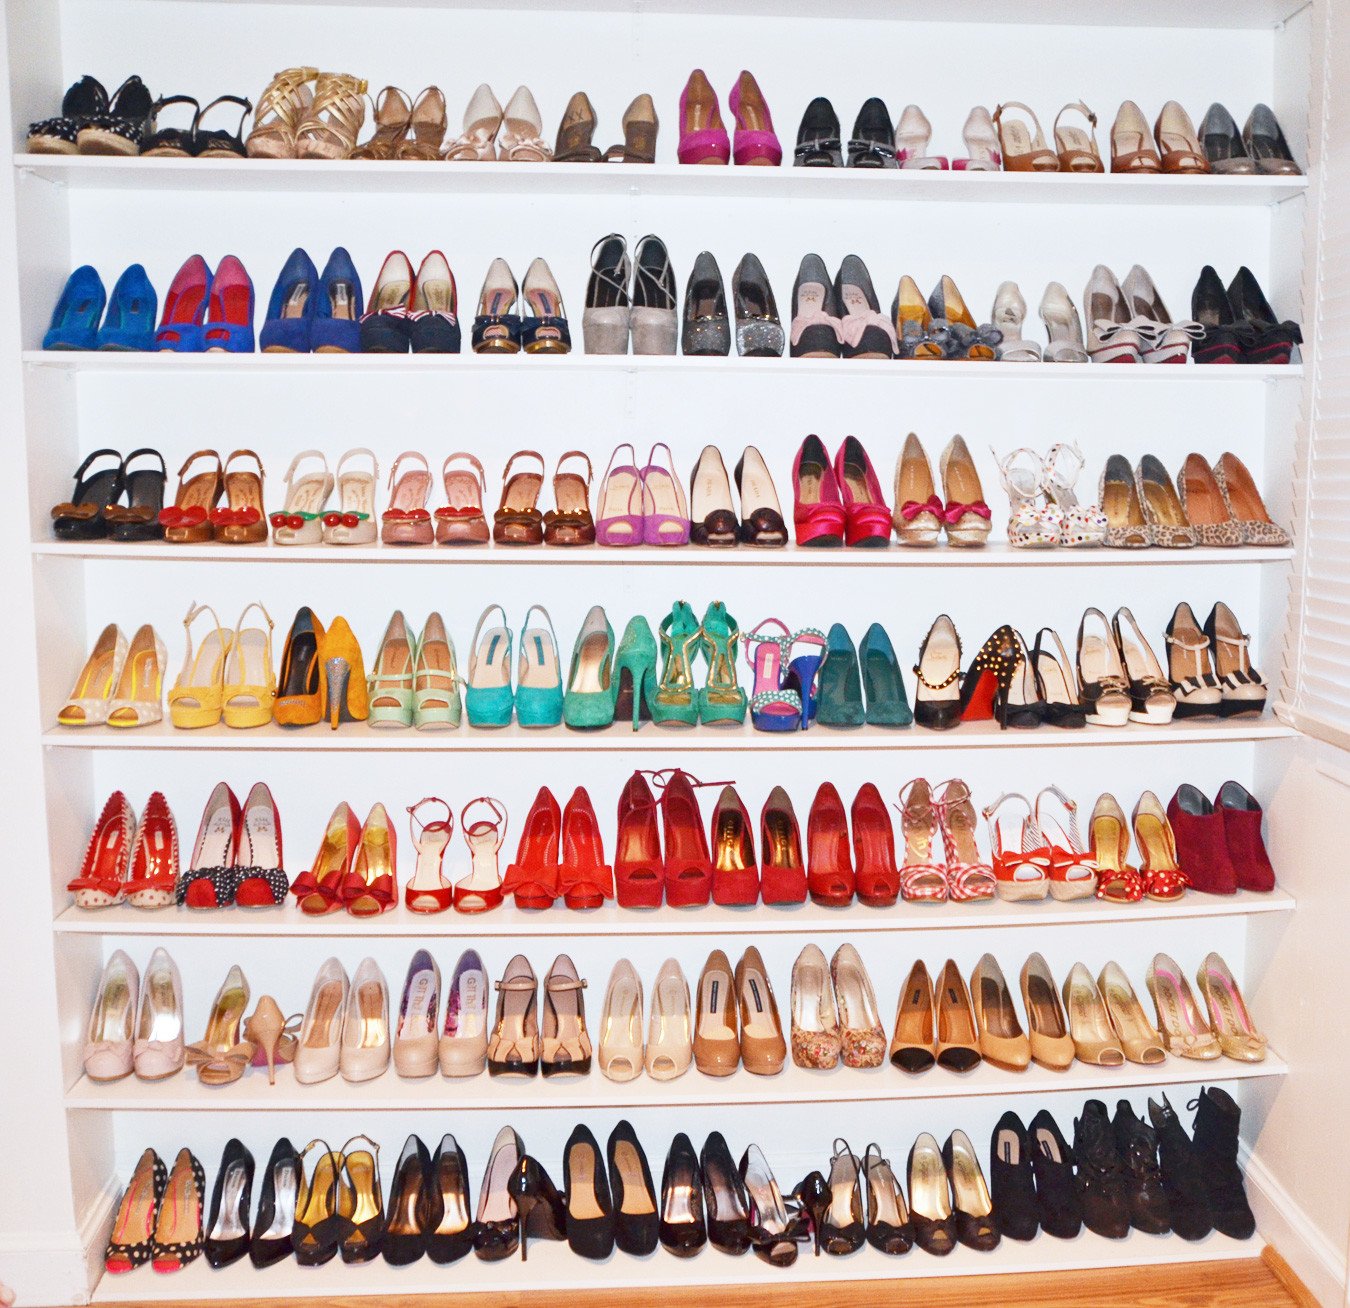 Shoe organisation: colourful shoes stored on shelves